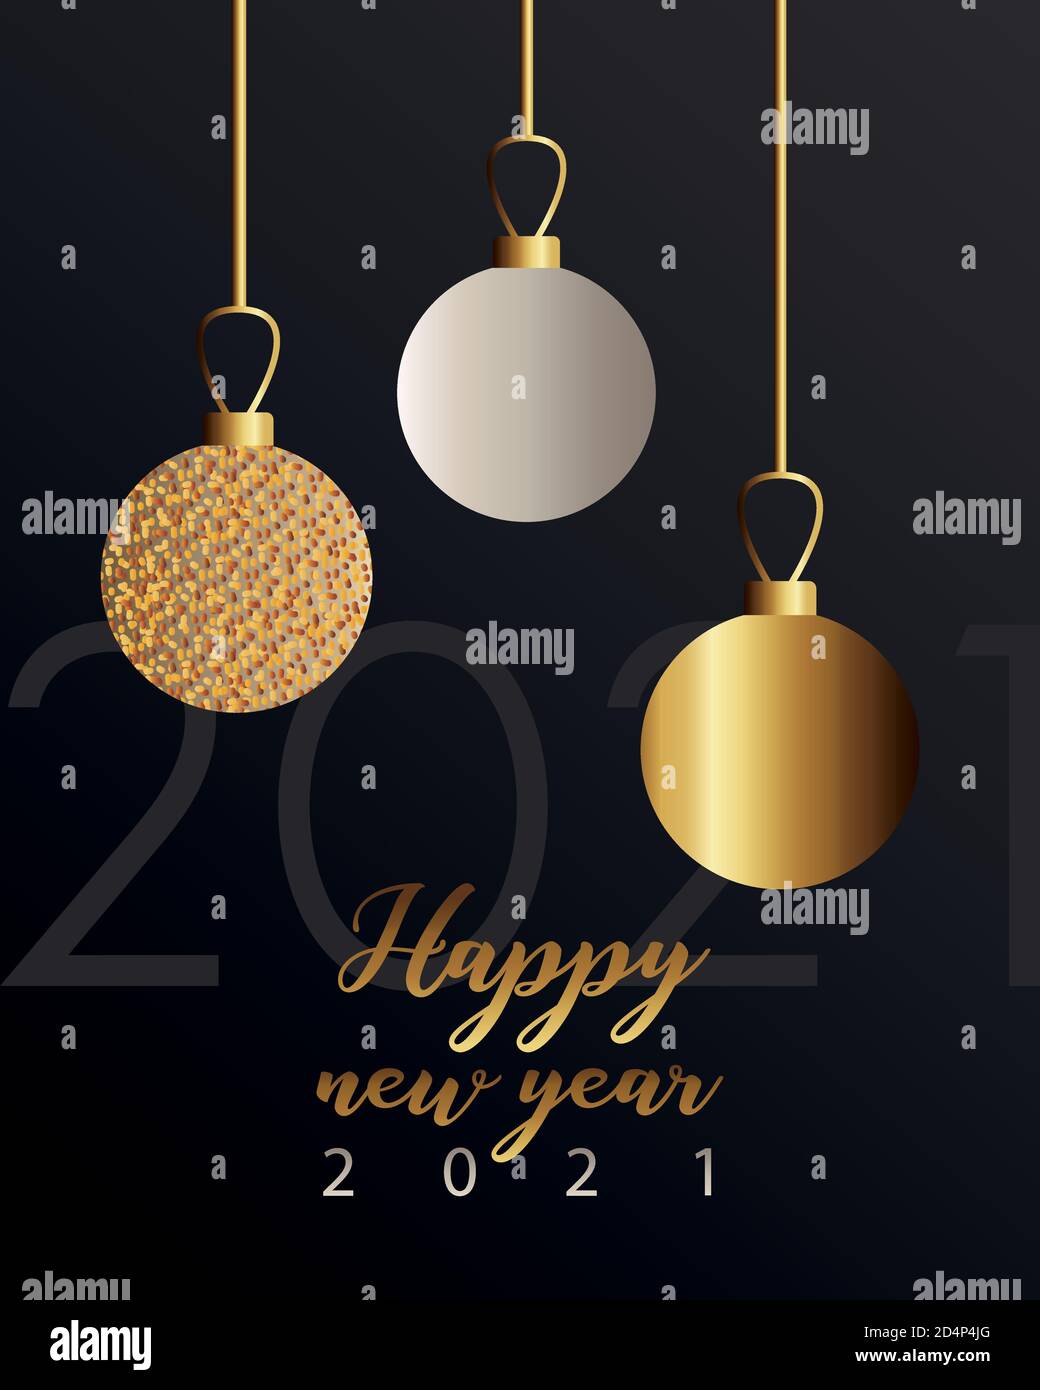 happy new year 2021 golden lettering with balls hanging in black background vector illustration design Stock Vector